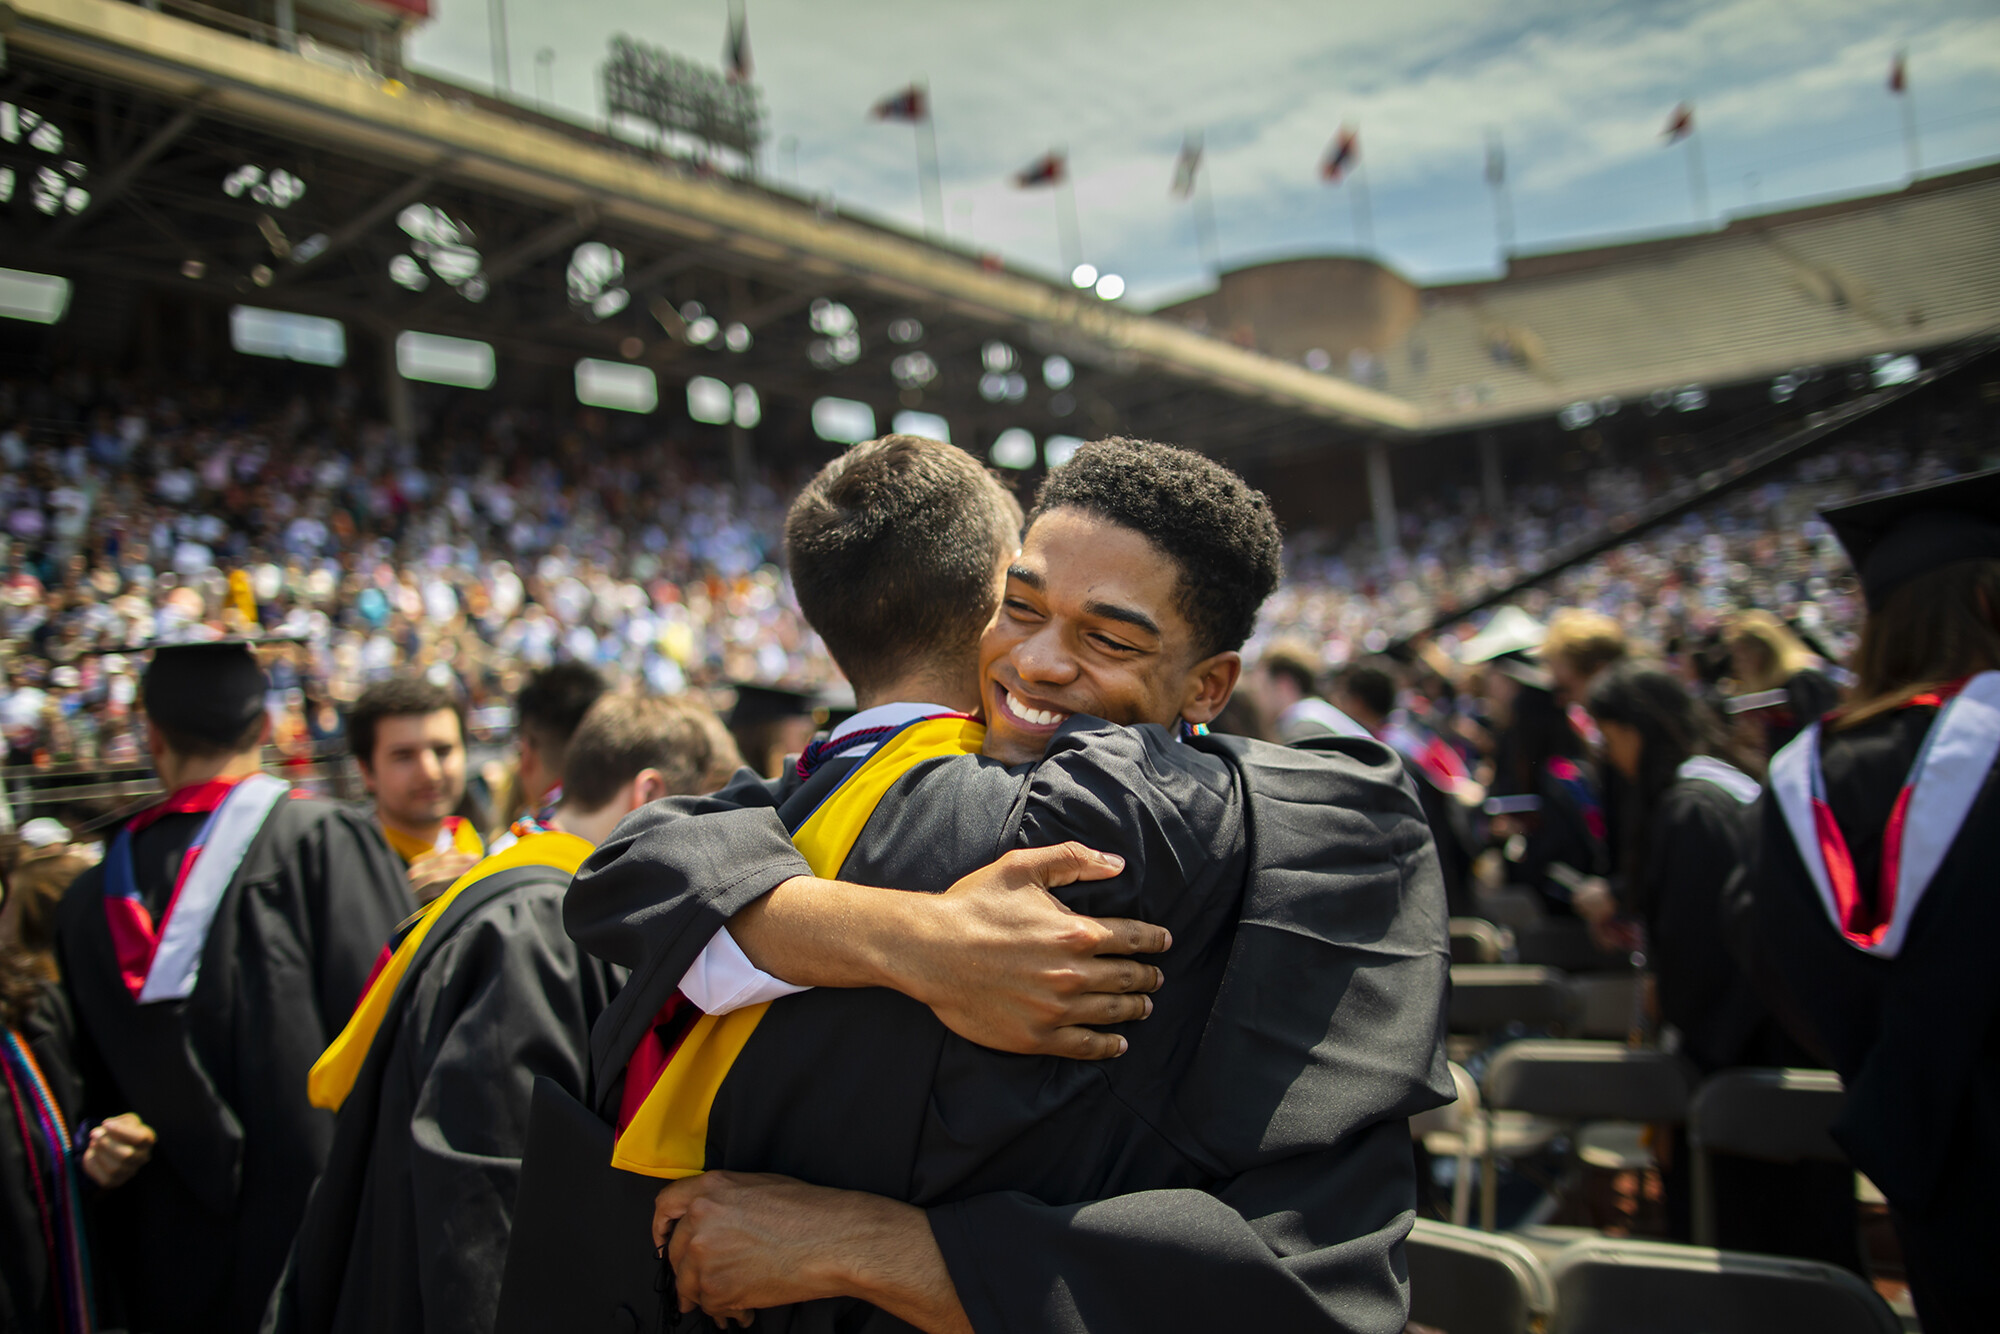 Two graduates embrace on the field at commencement.